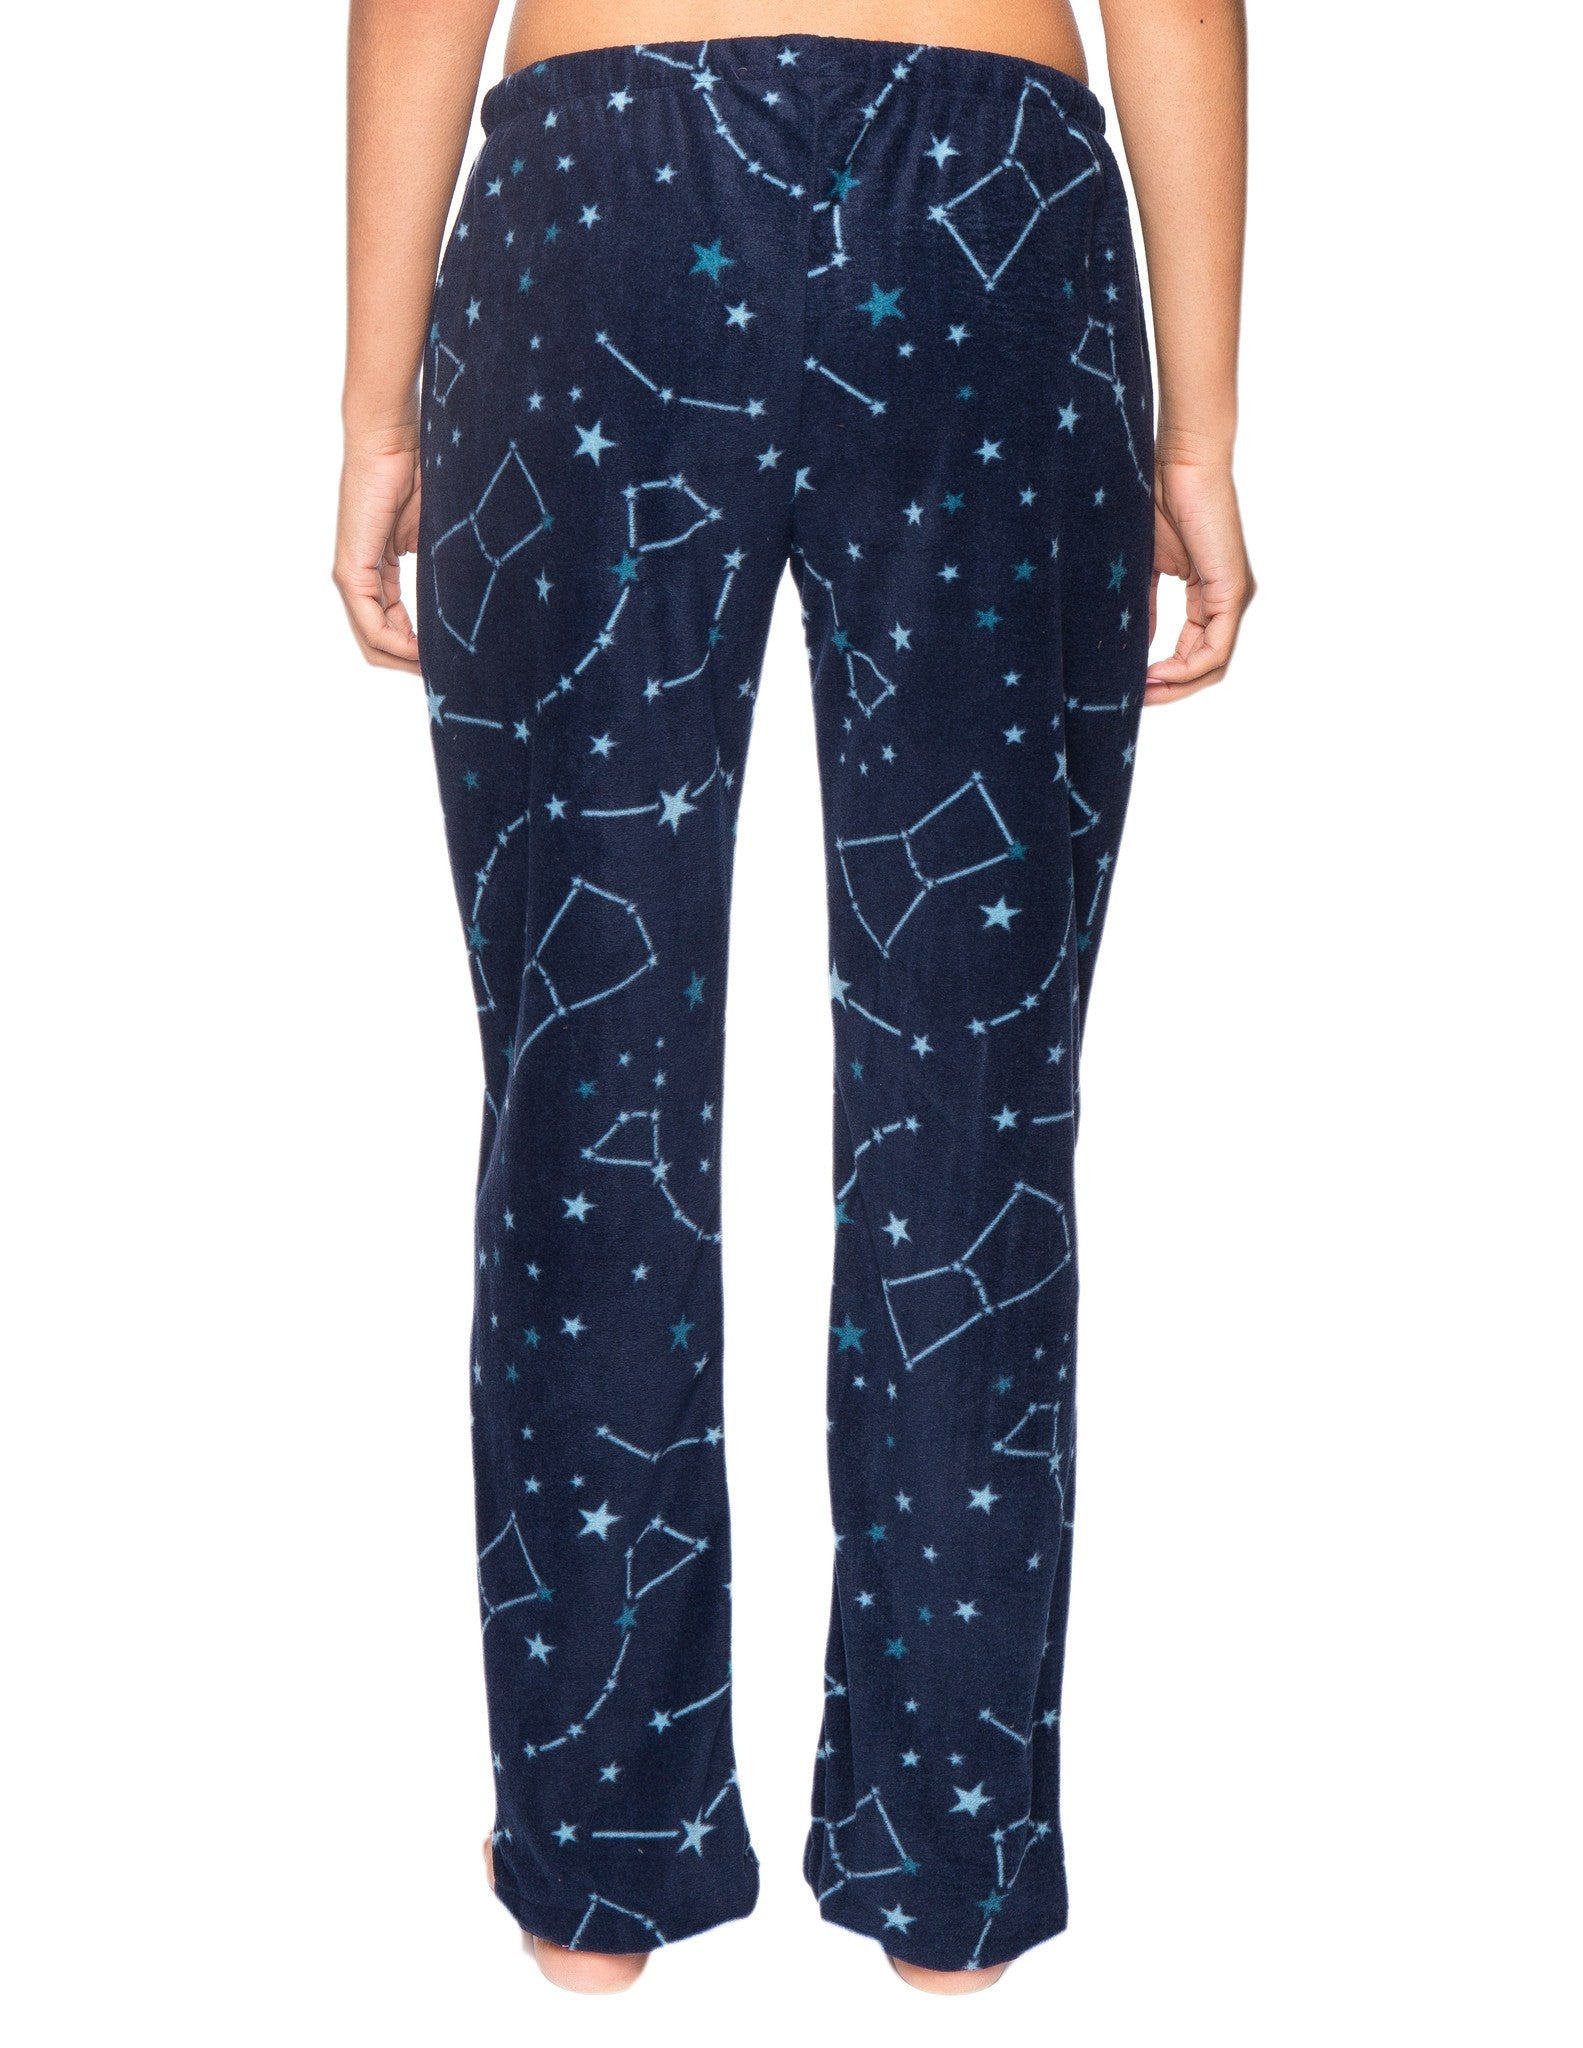 Constellations Navy/Teal